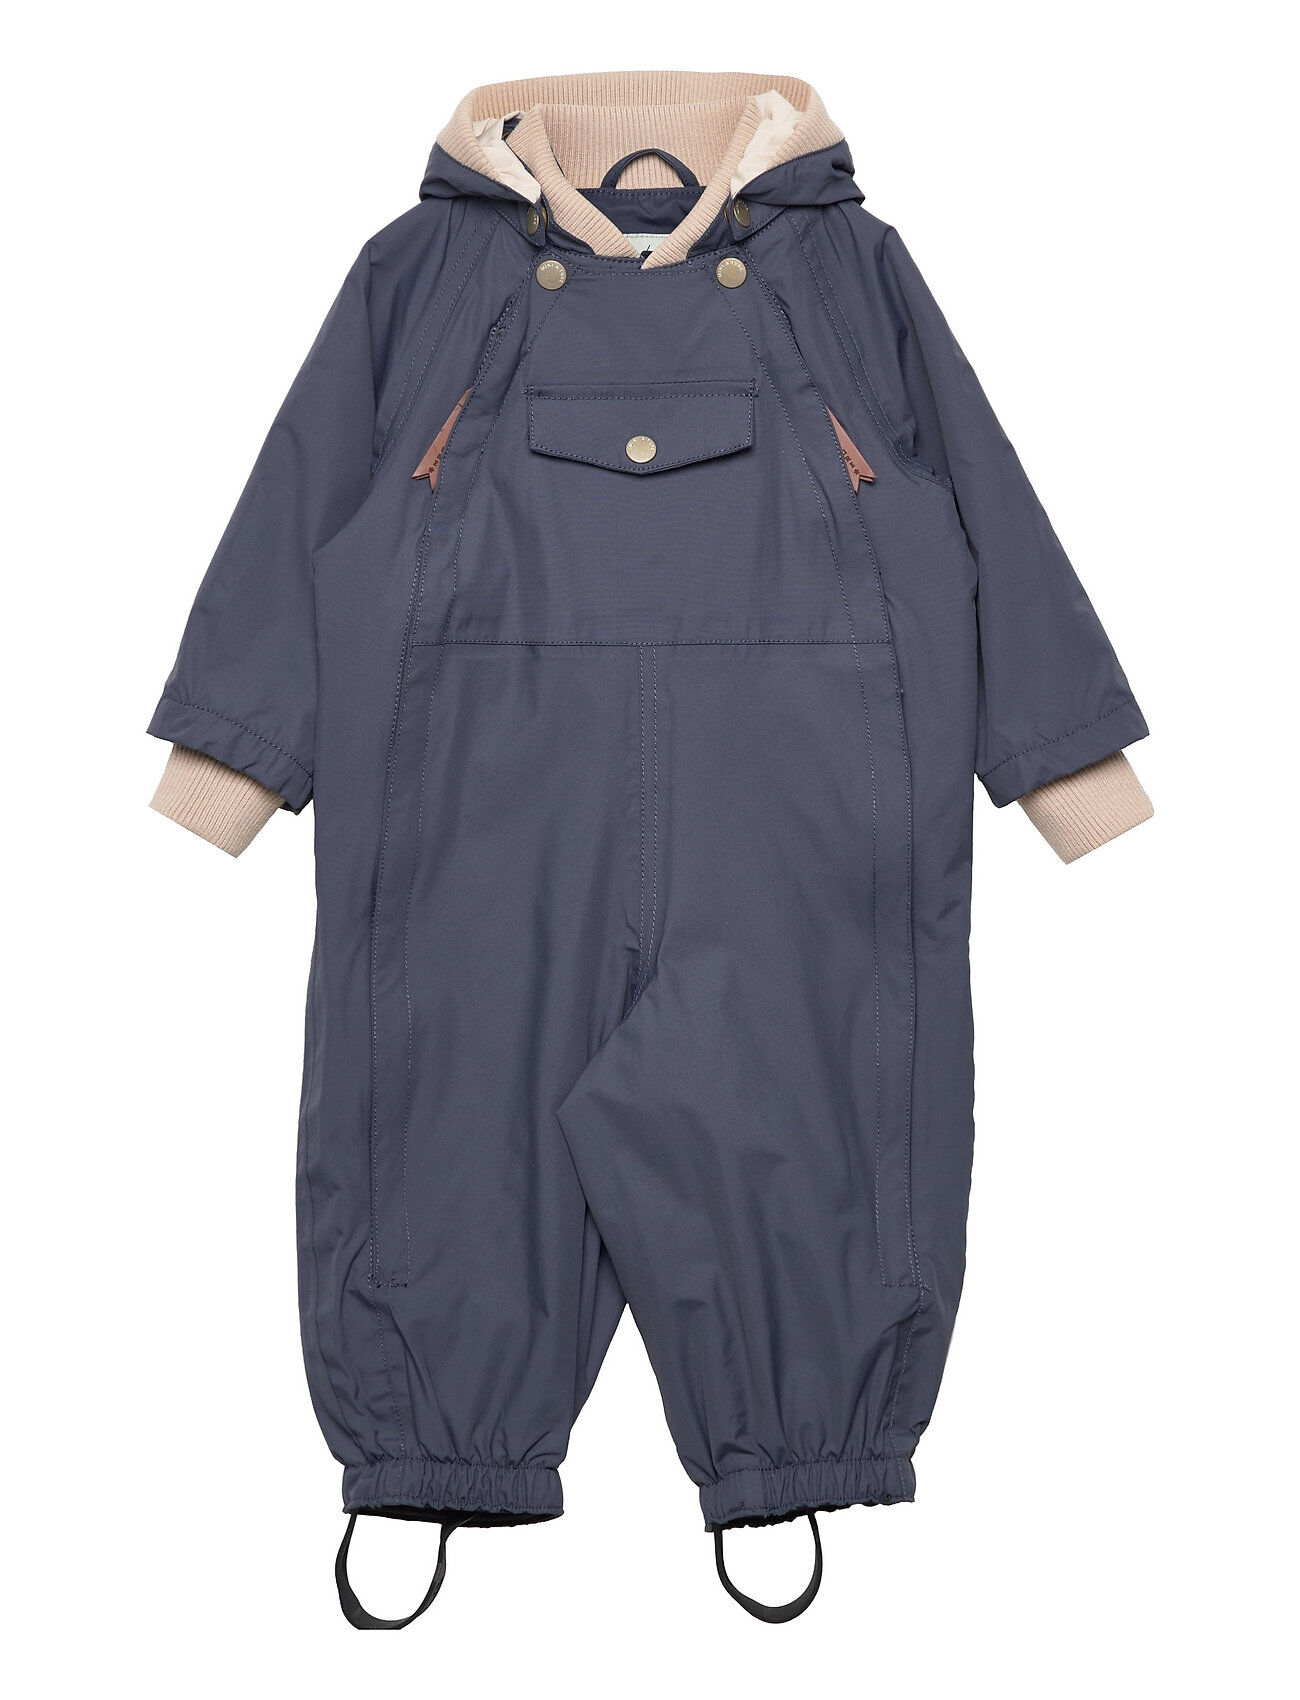 Mini A Ture Wisto Suit Fleece, M Outerwear Shell Clothing Shell Sets Blå Mini A Ture